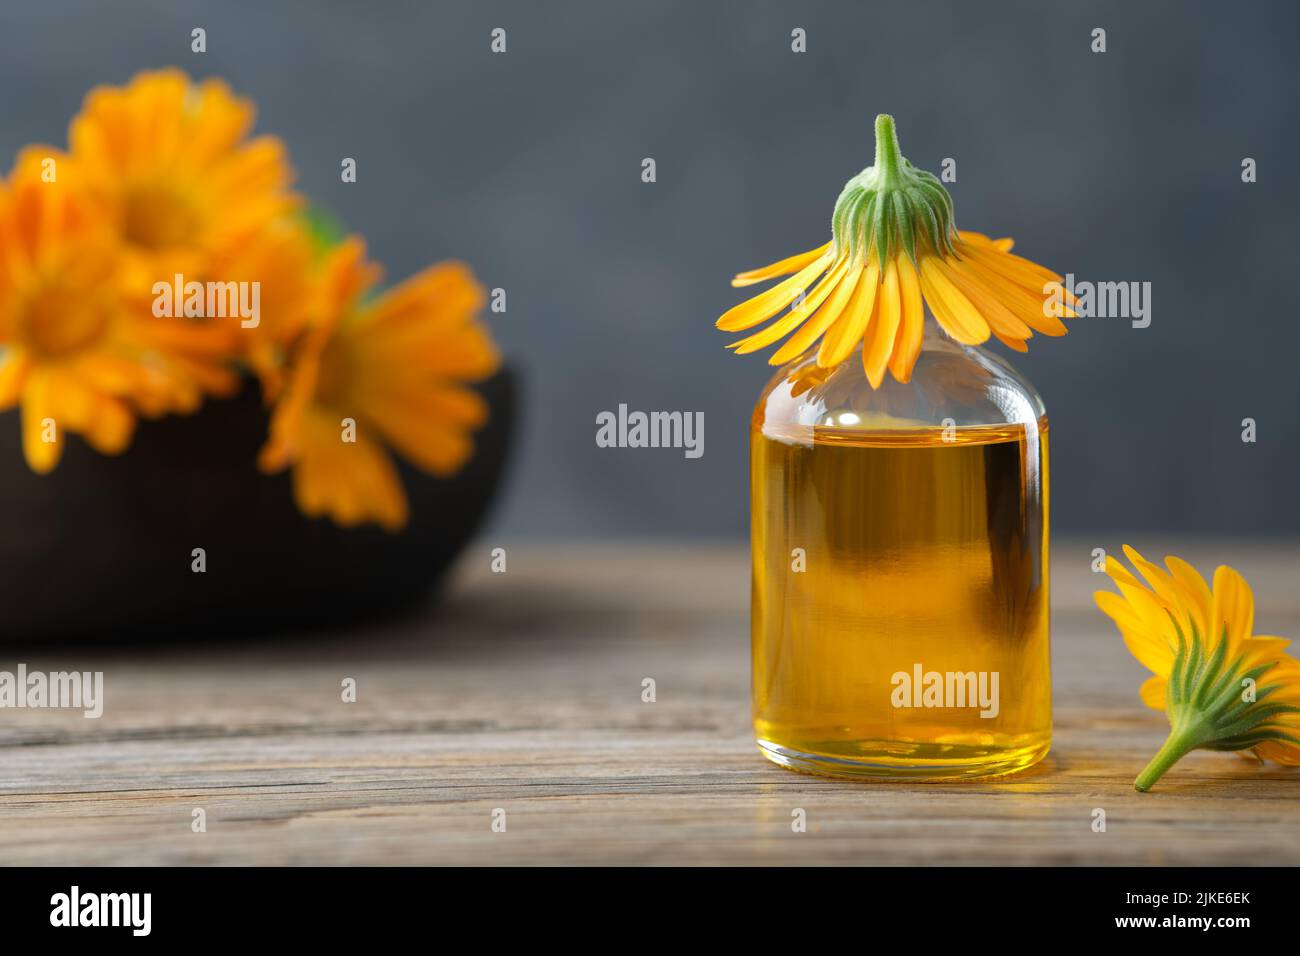 Bottle of calendula essential oil or infusion and marigold flowers on background. Alternative herbal medicine. Stock Photo